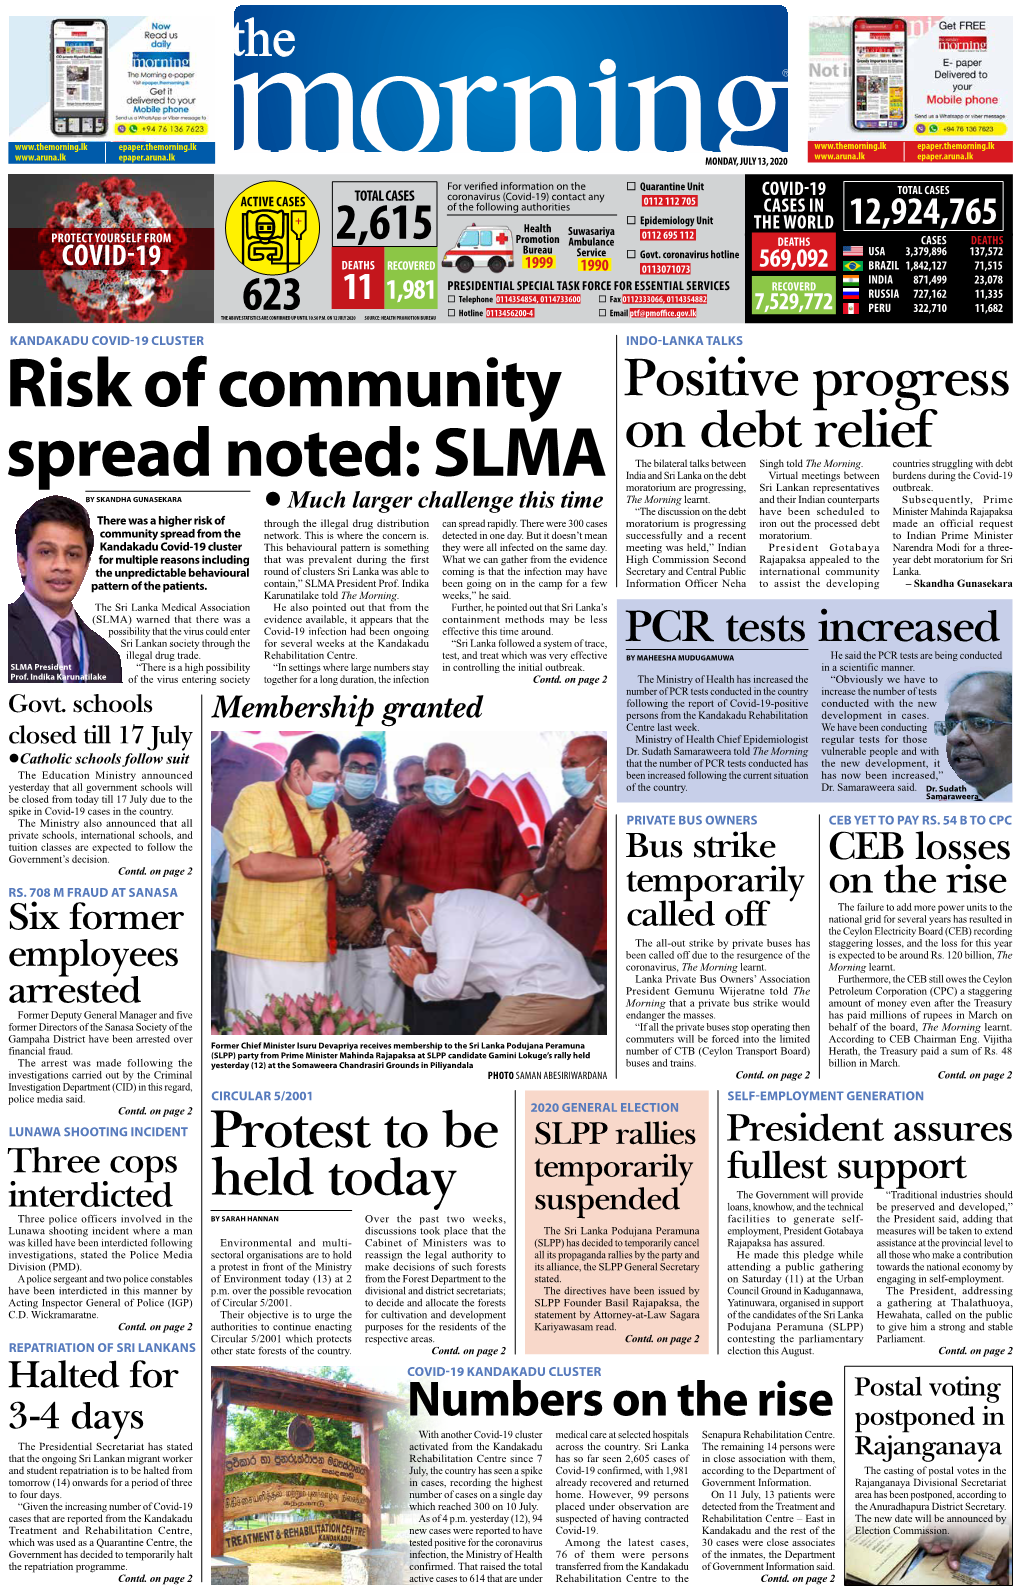 Risk of Community Spread Noted